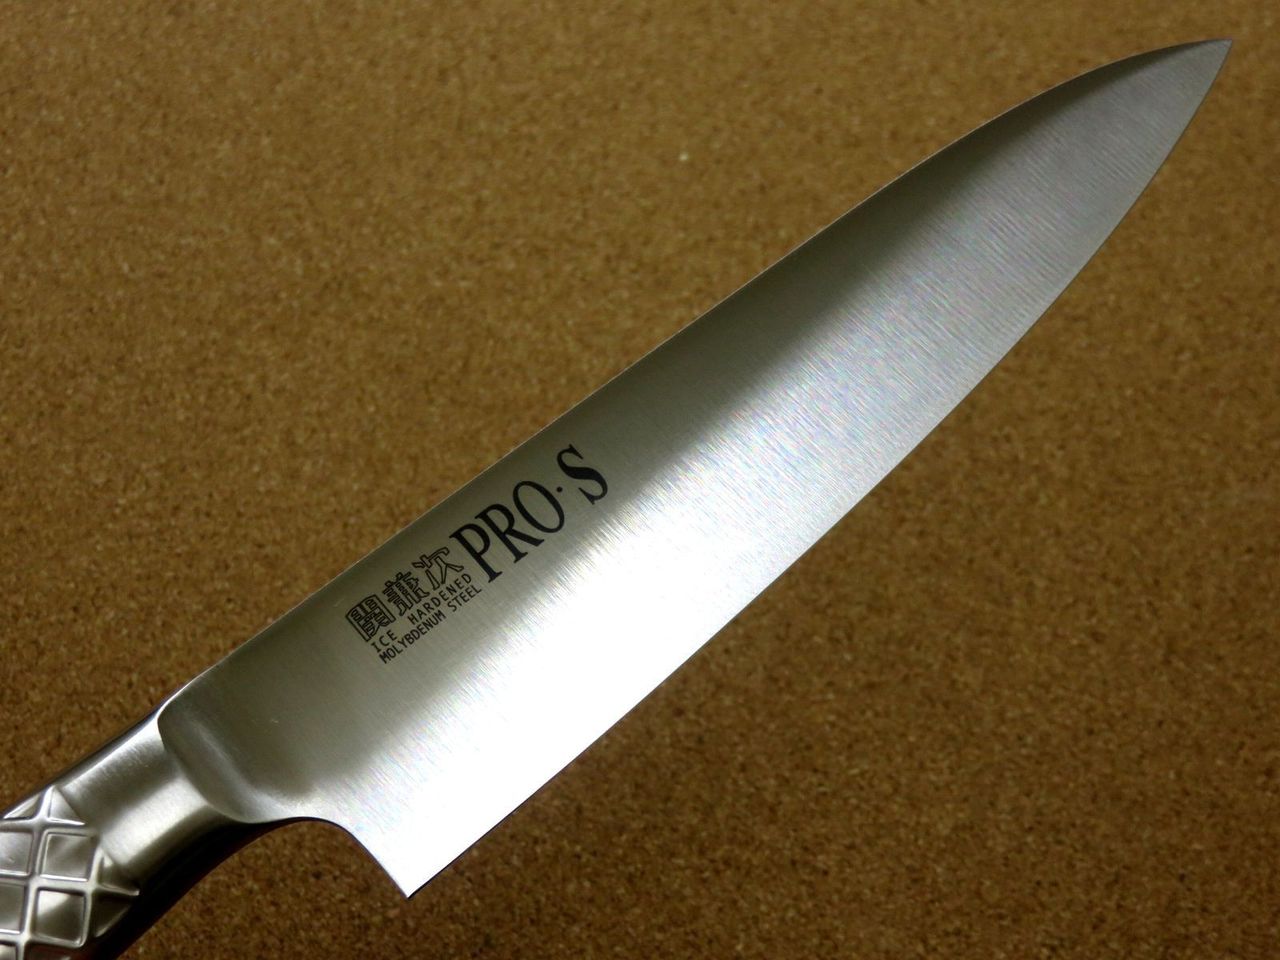 Japanese PRO-S Kitchen Gyuto Chef's Knife 7.1 inch Stainless Handle SEKI JAPAN